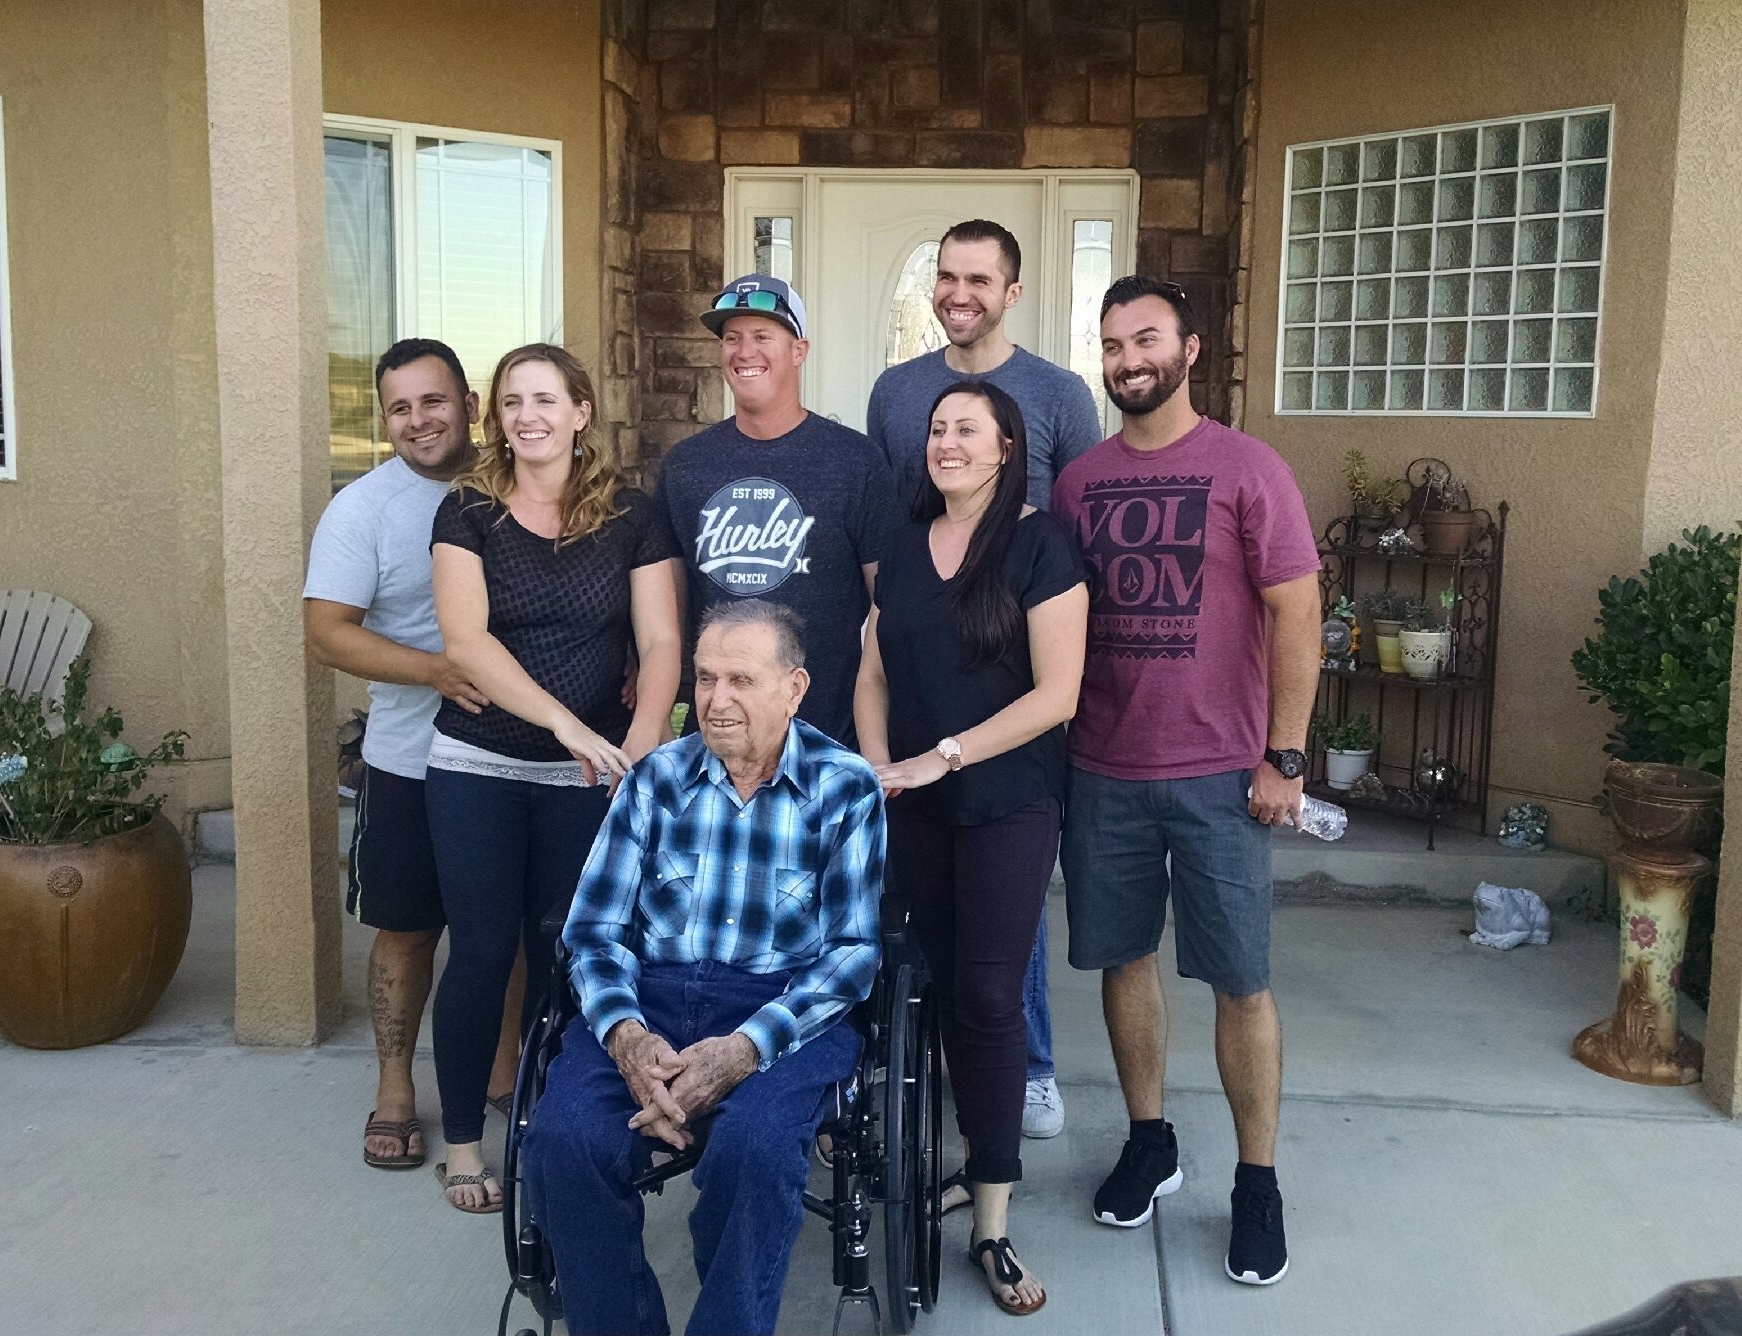 Pius and Grandchildren, and Shawna's husband and Kayla's friend at Lindsey and Carla's home, July 17, 2016.